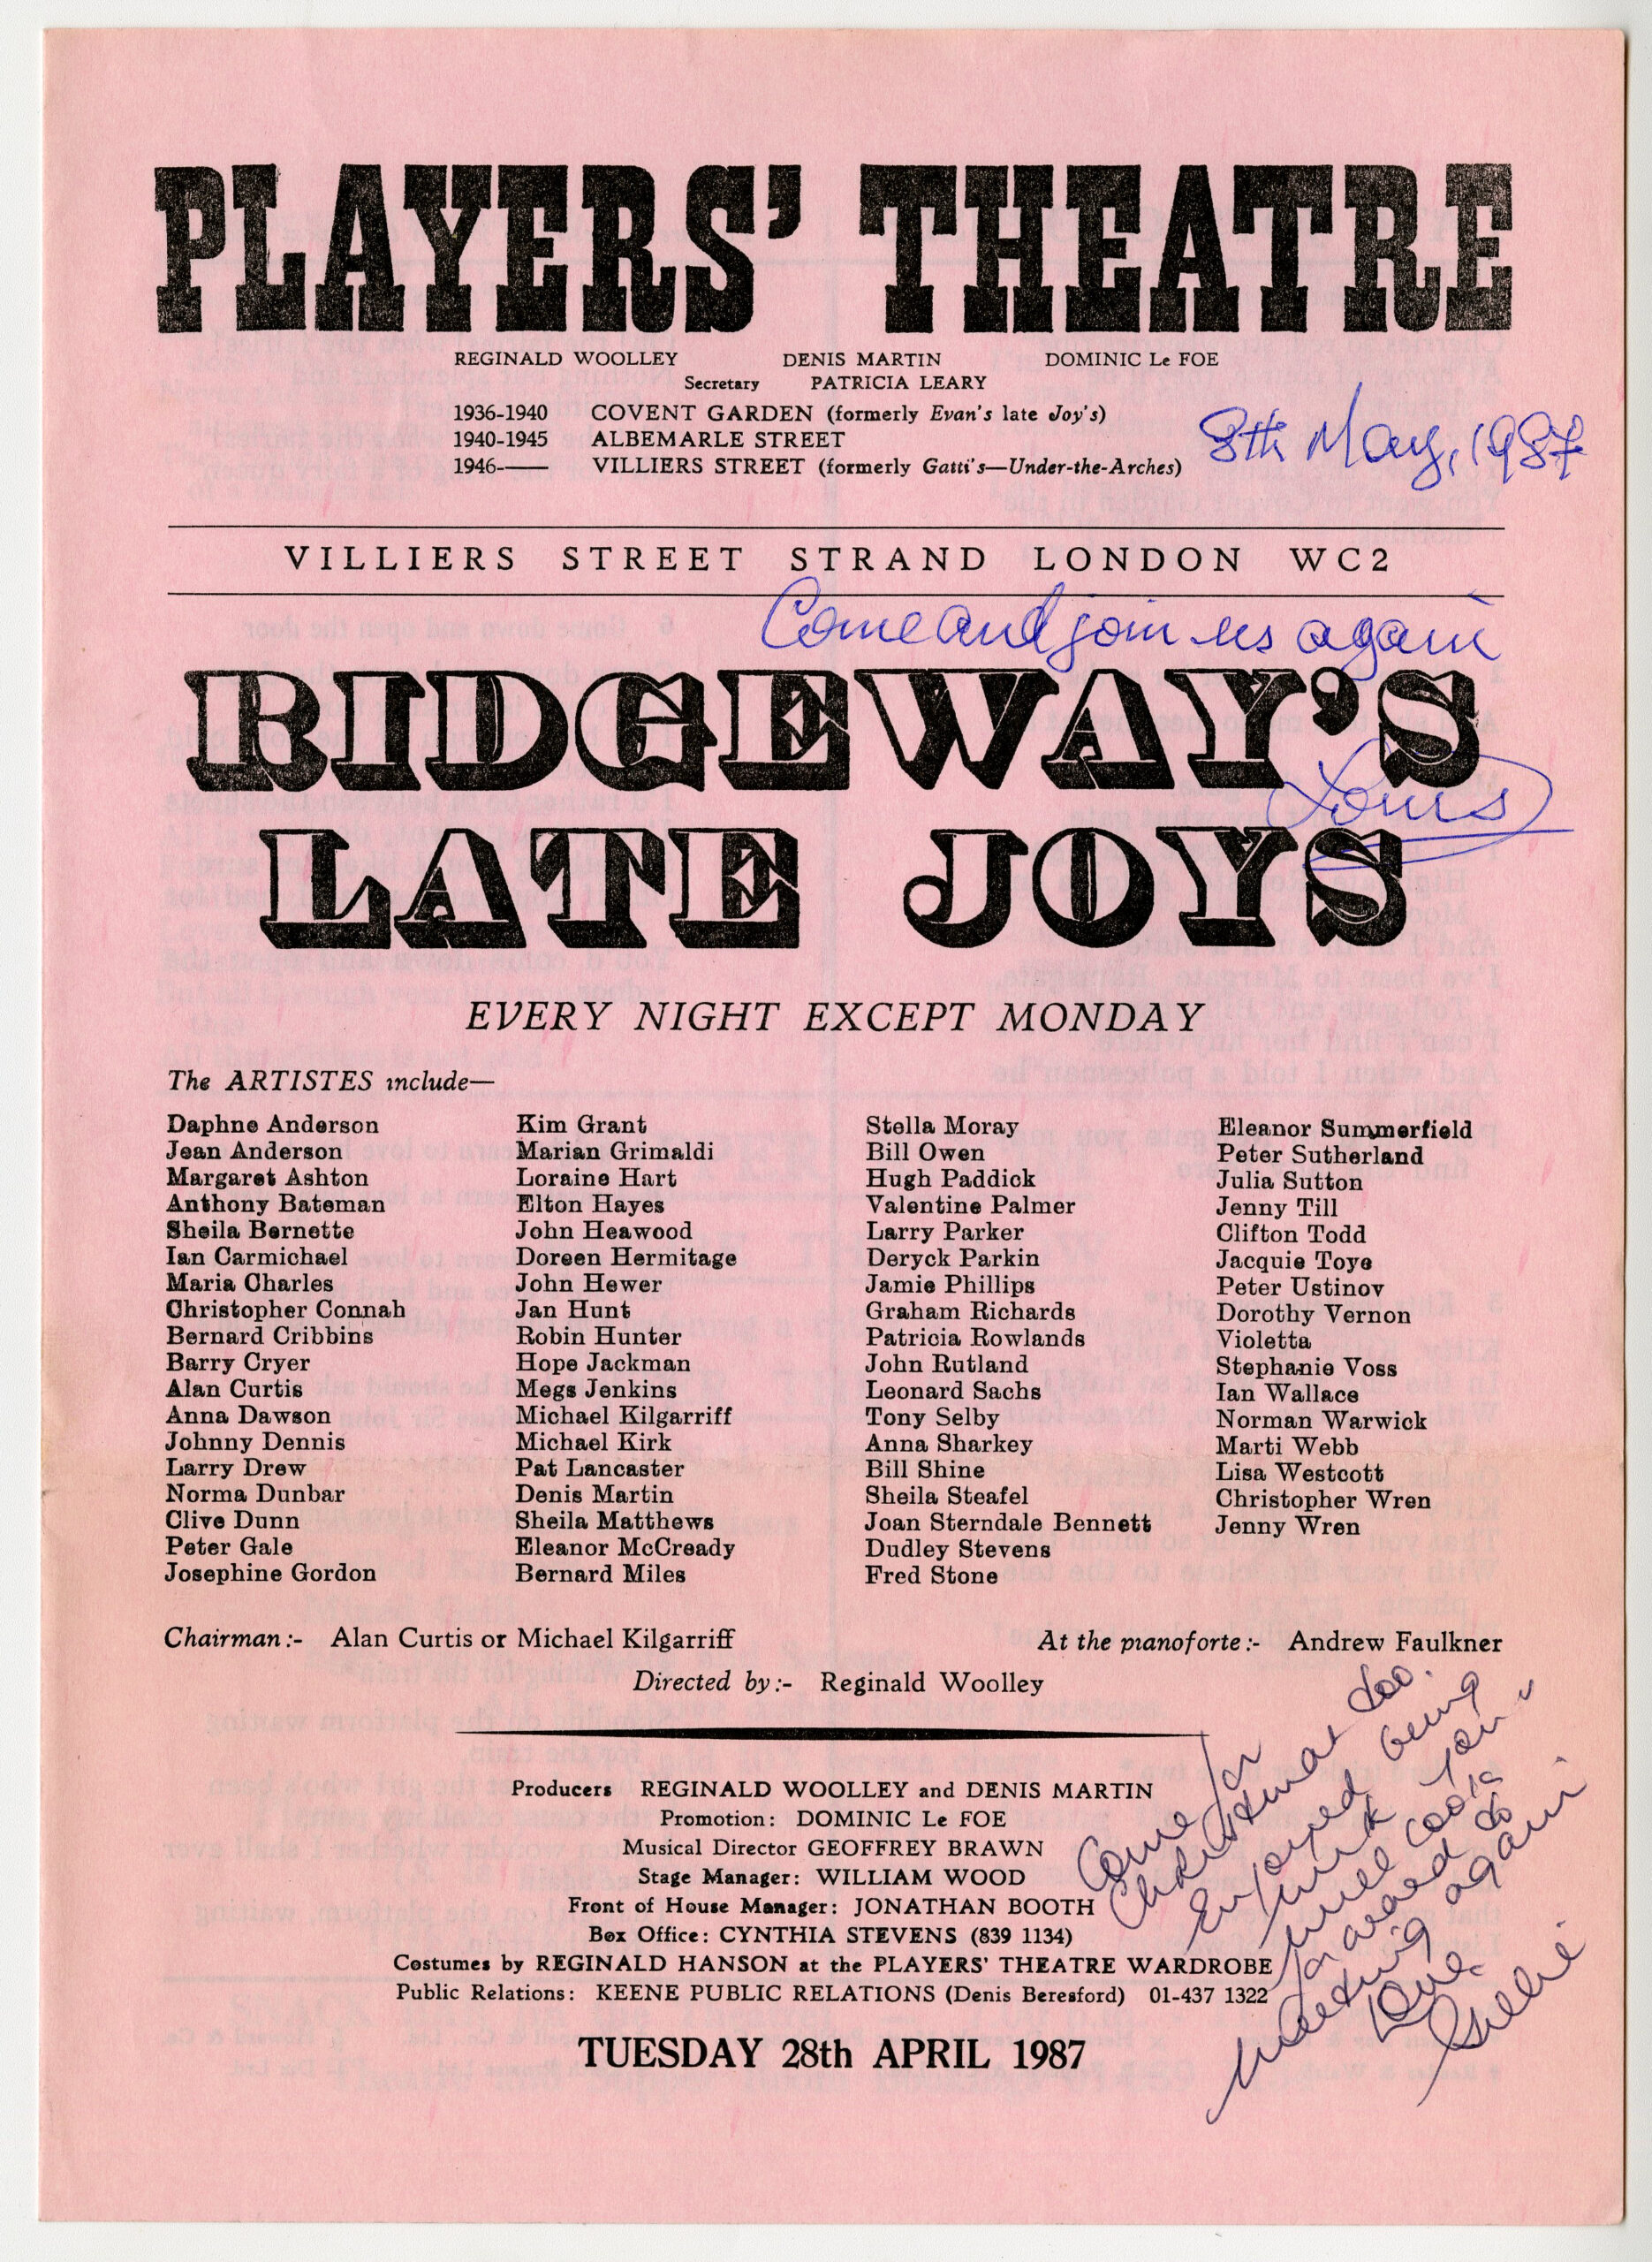 A pink programme from a cabaret performance called Ridgeway's Late Joys, and which features signatures from various members of the cast.